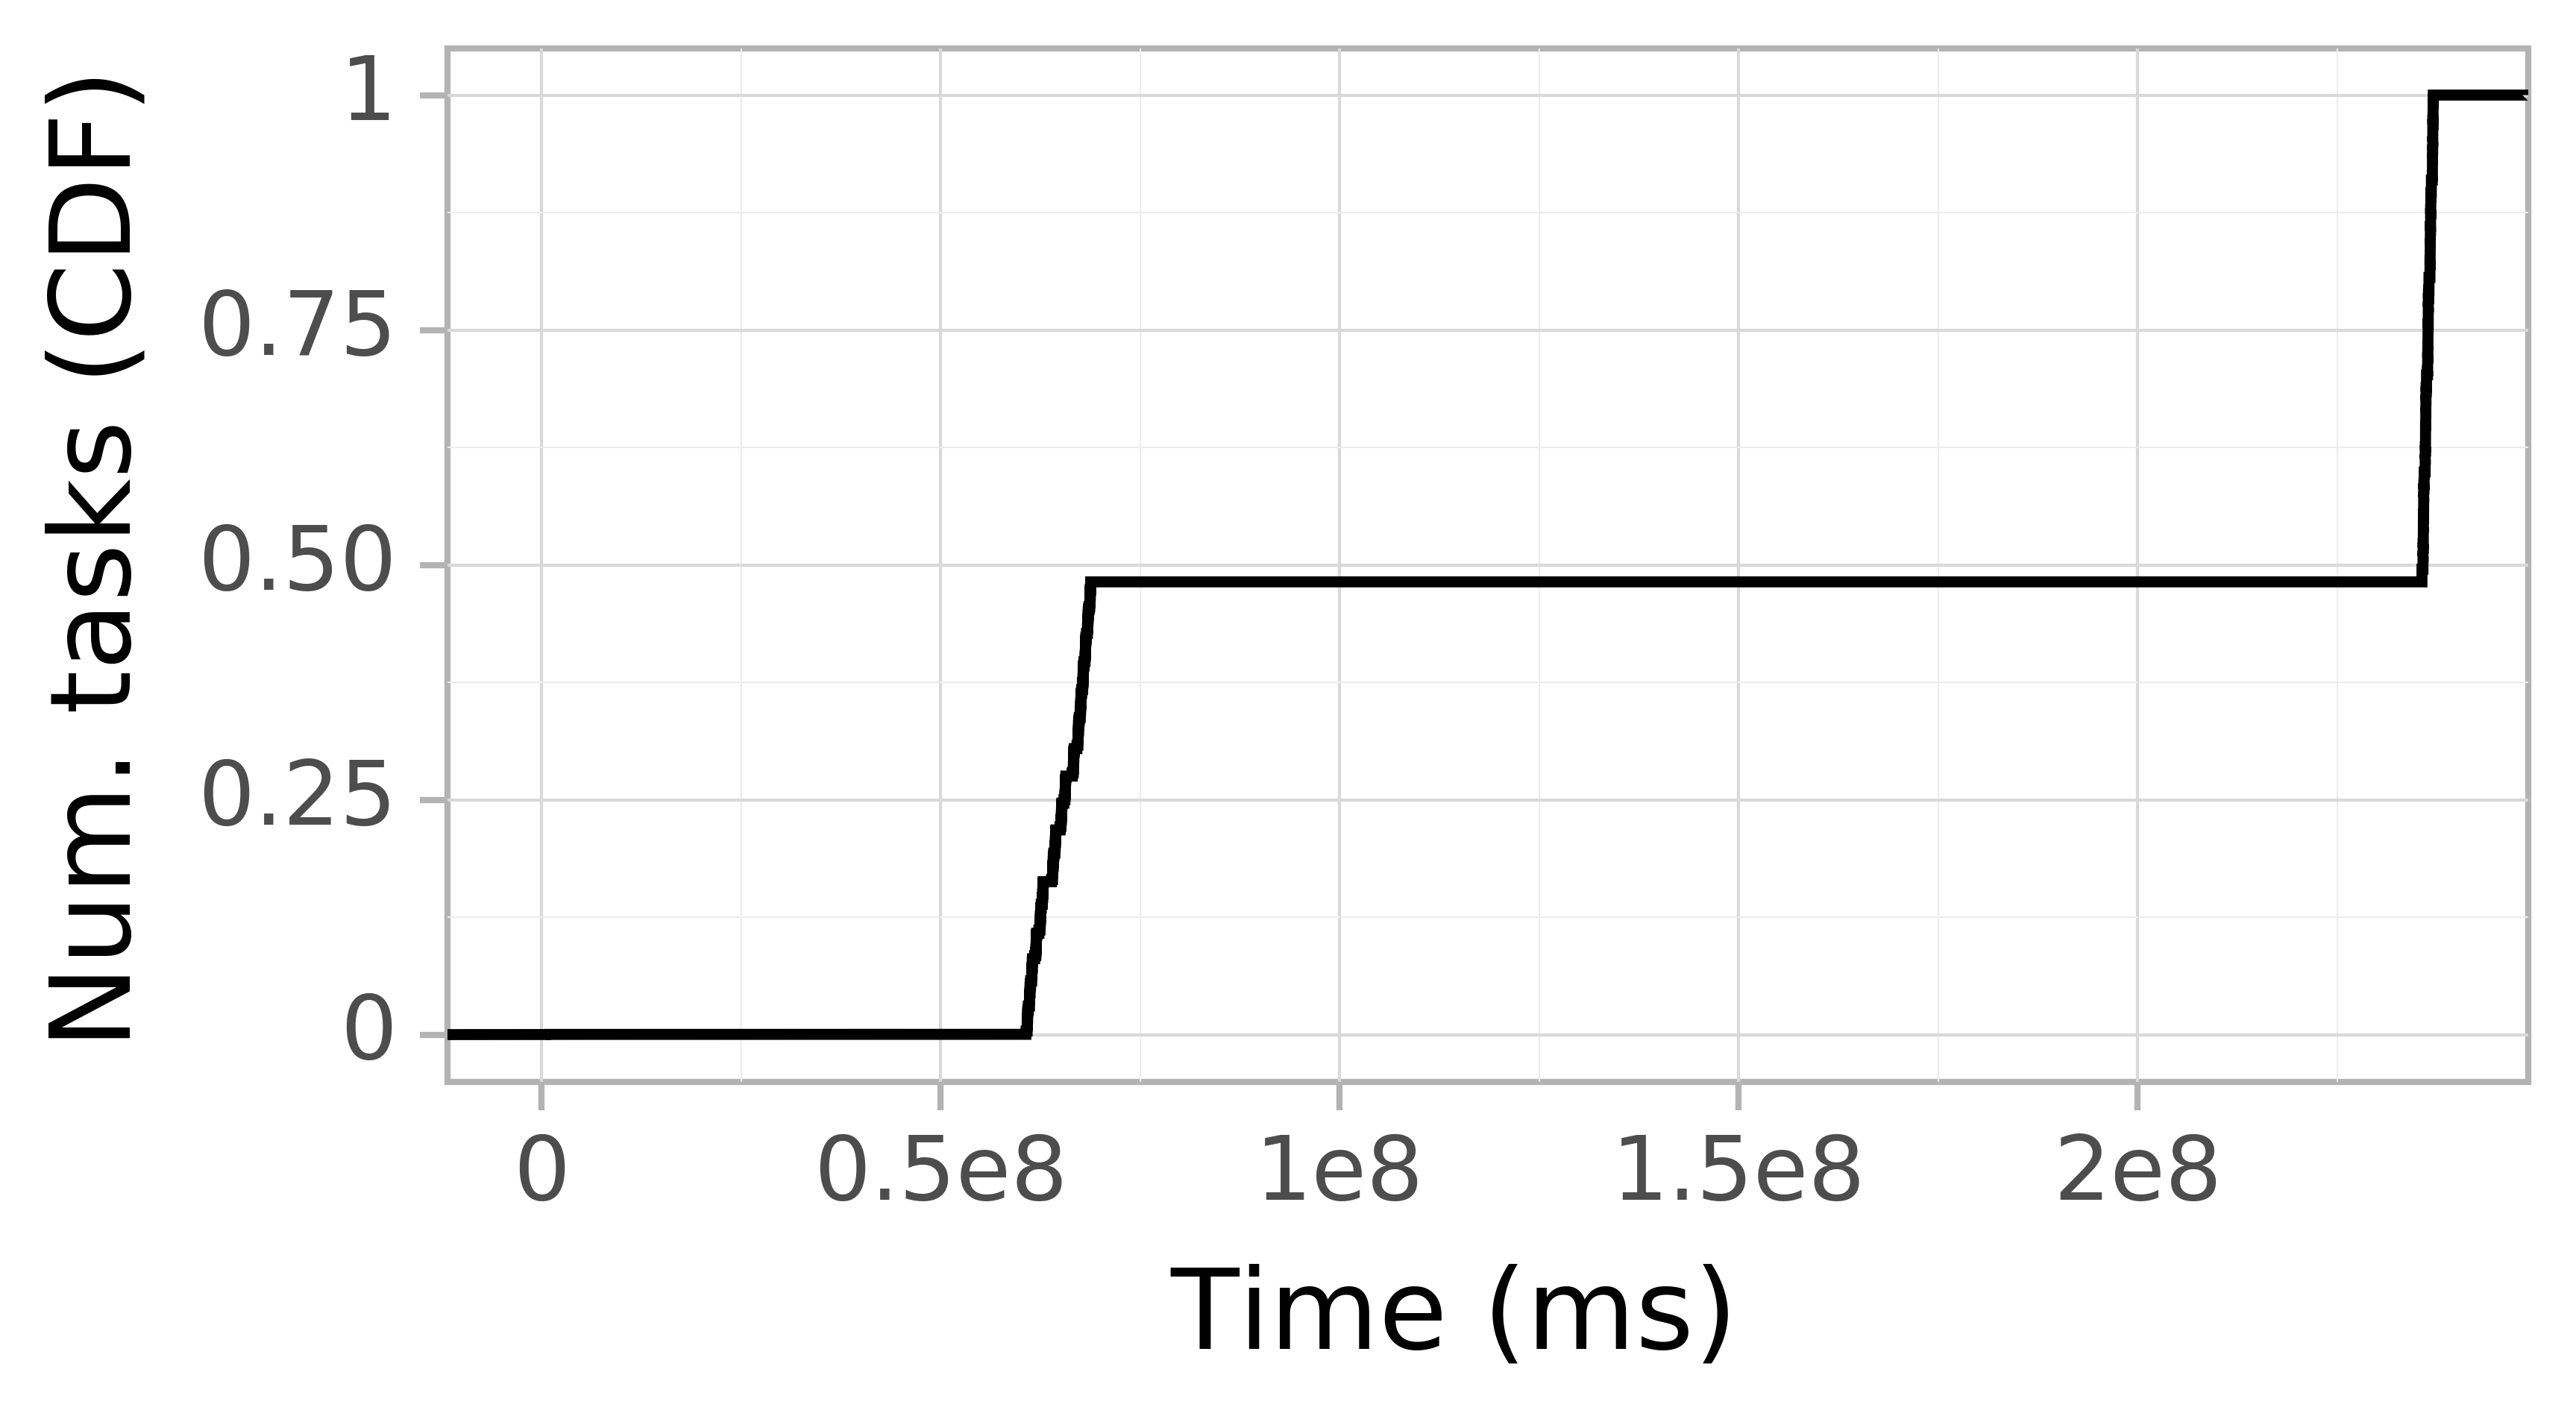 Task arrival CDF graph for the askalon-new_ee31 trace.